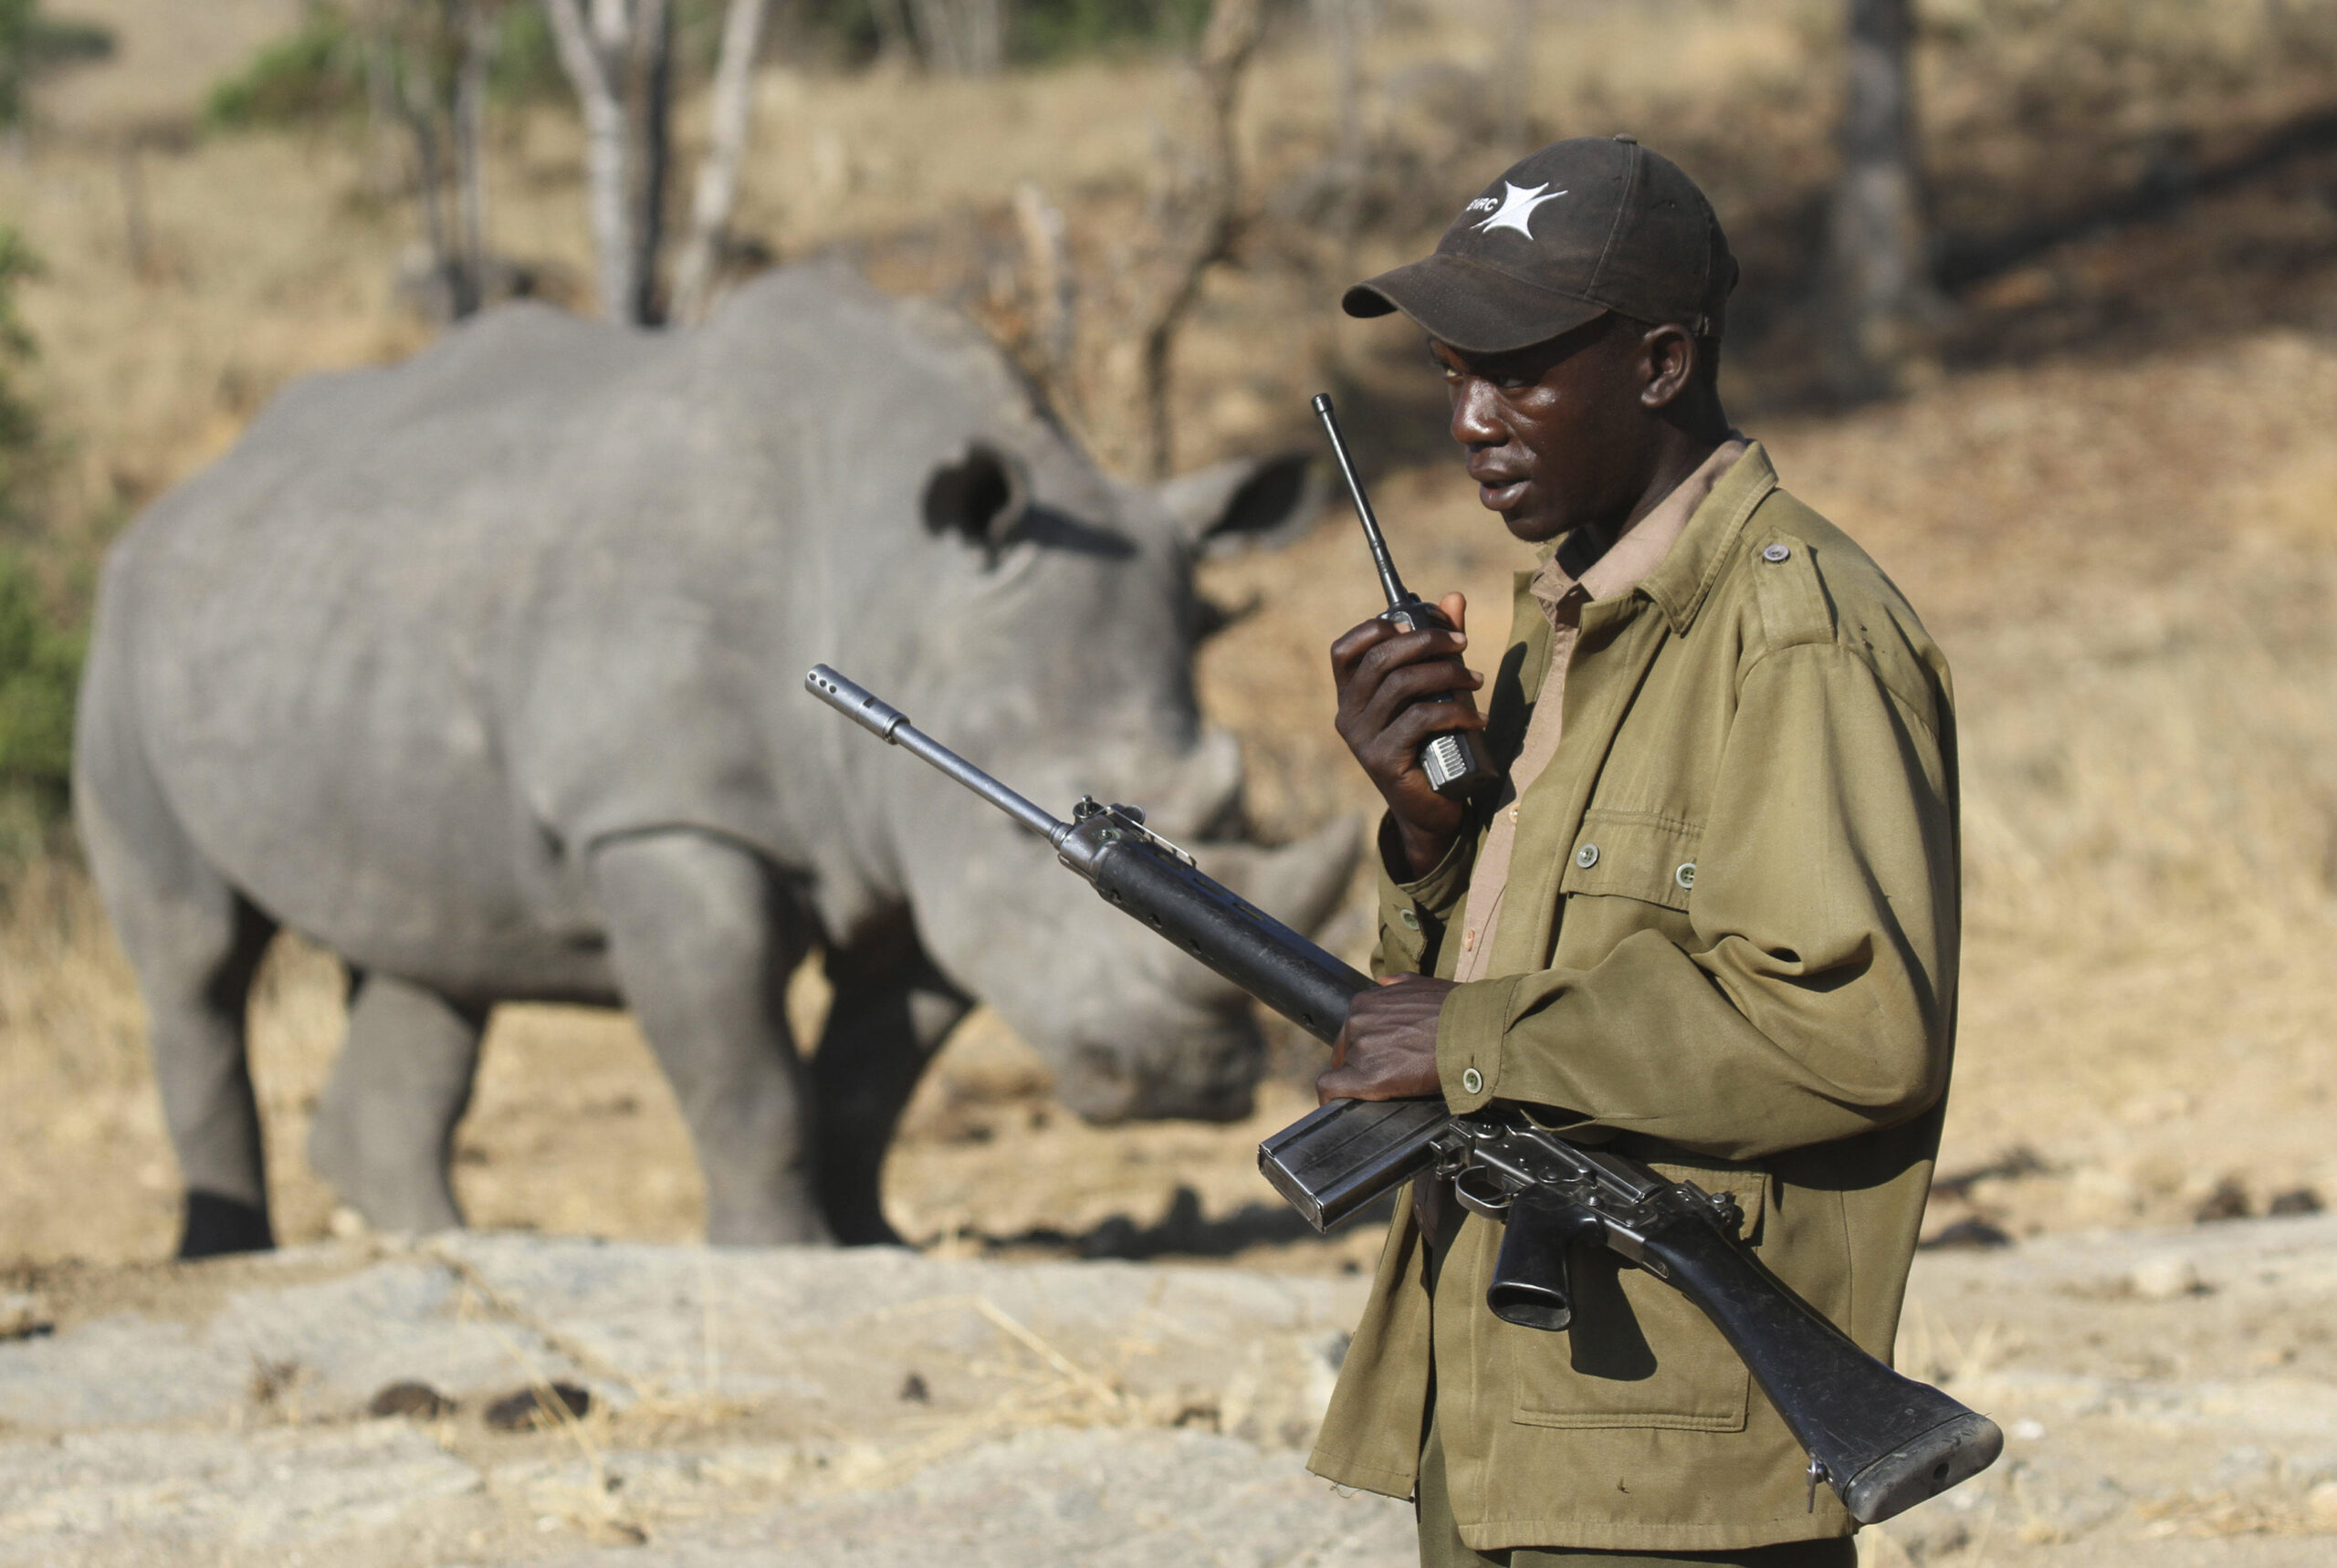 An armed ranger talks on his radio in front of a white rhinoceros at the Imire Rhino and Wildlife Conservation Park near Marondera